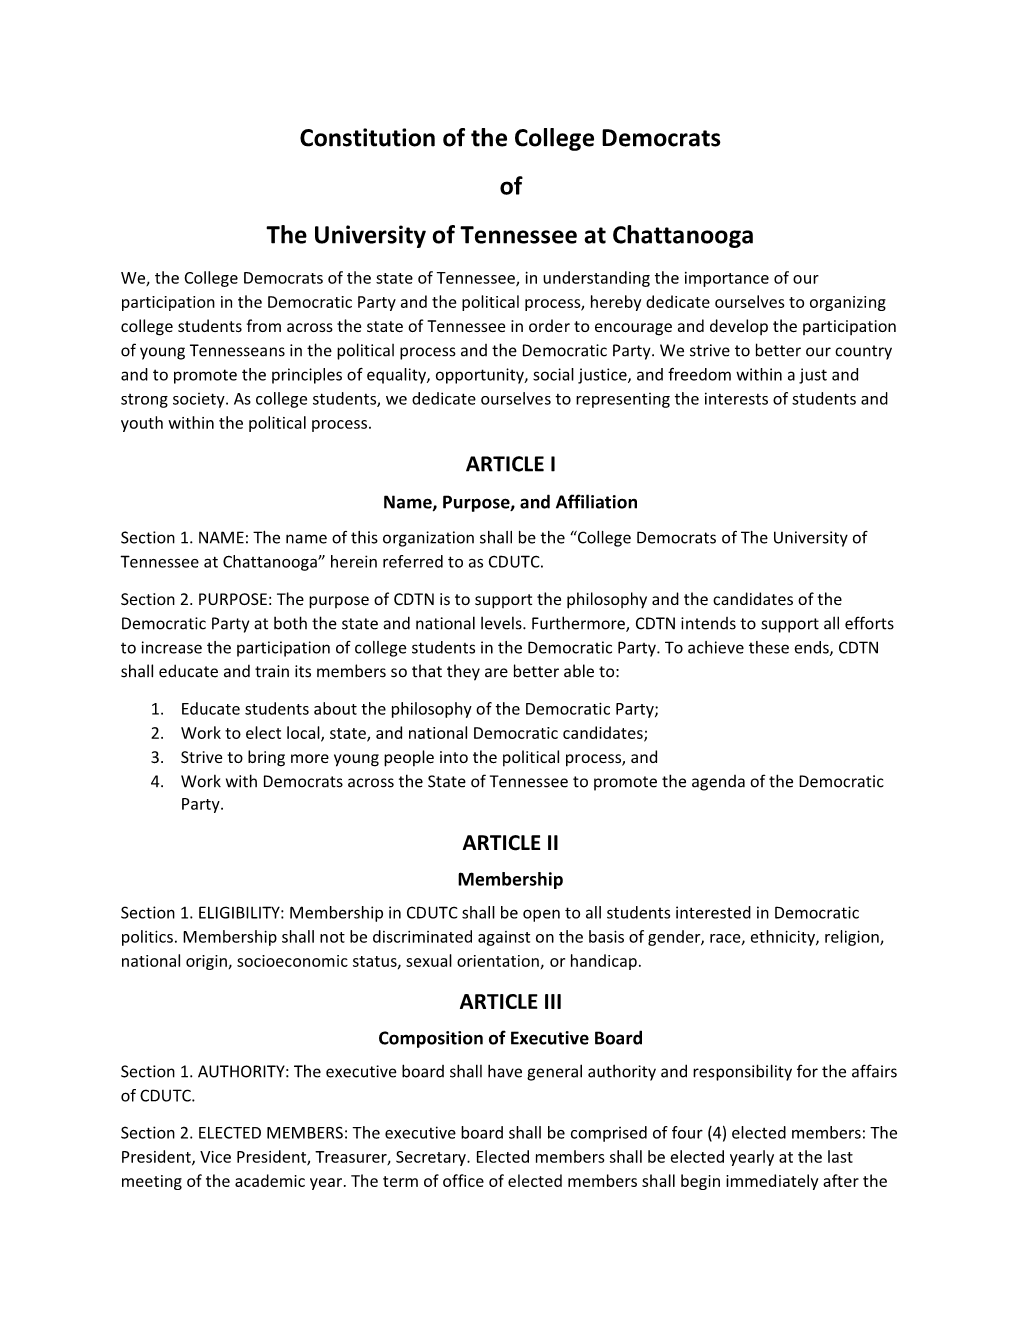 Constitution of the College Democrats of the University of Tennessee at Chattanooga